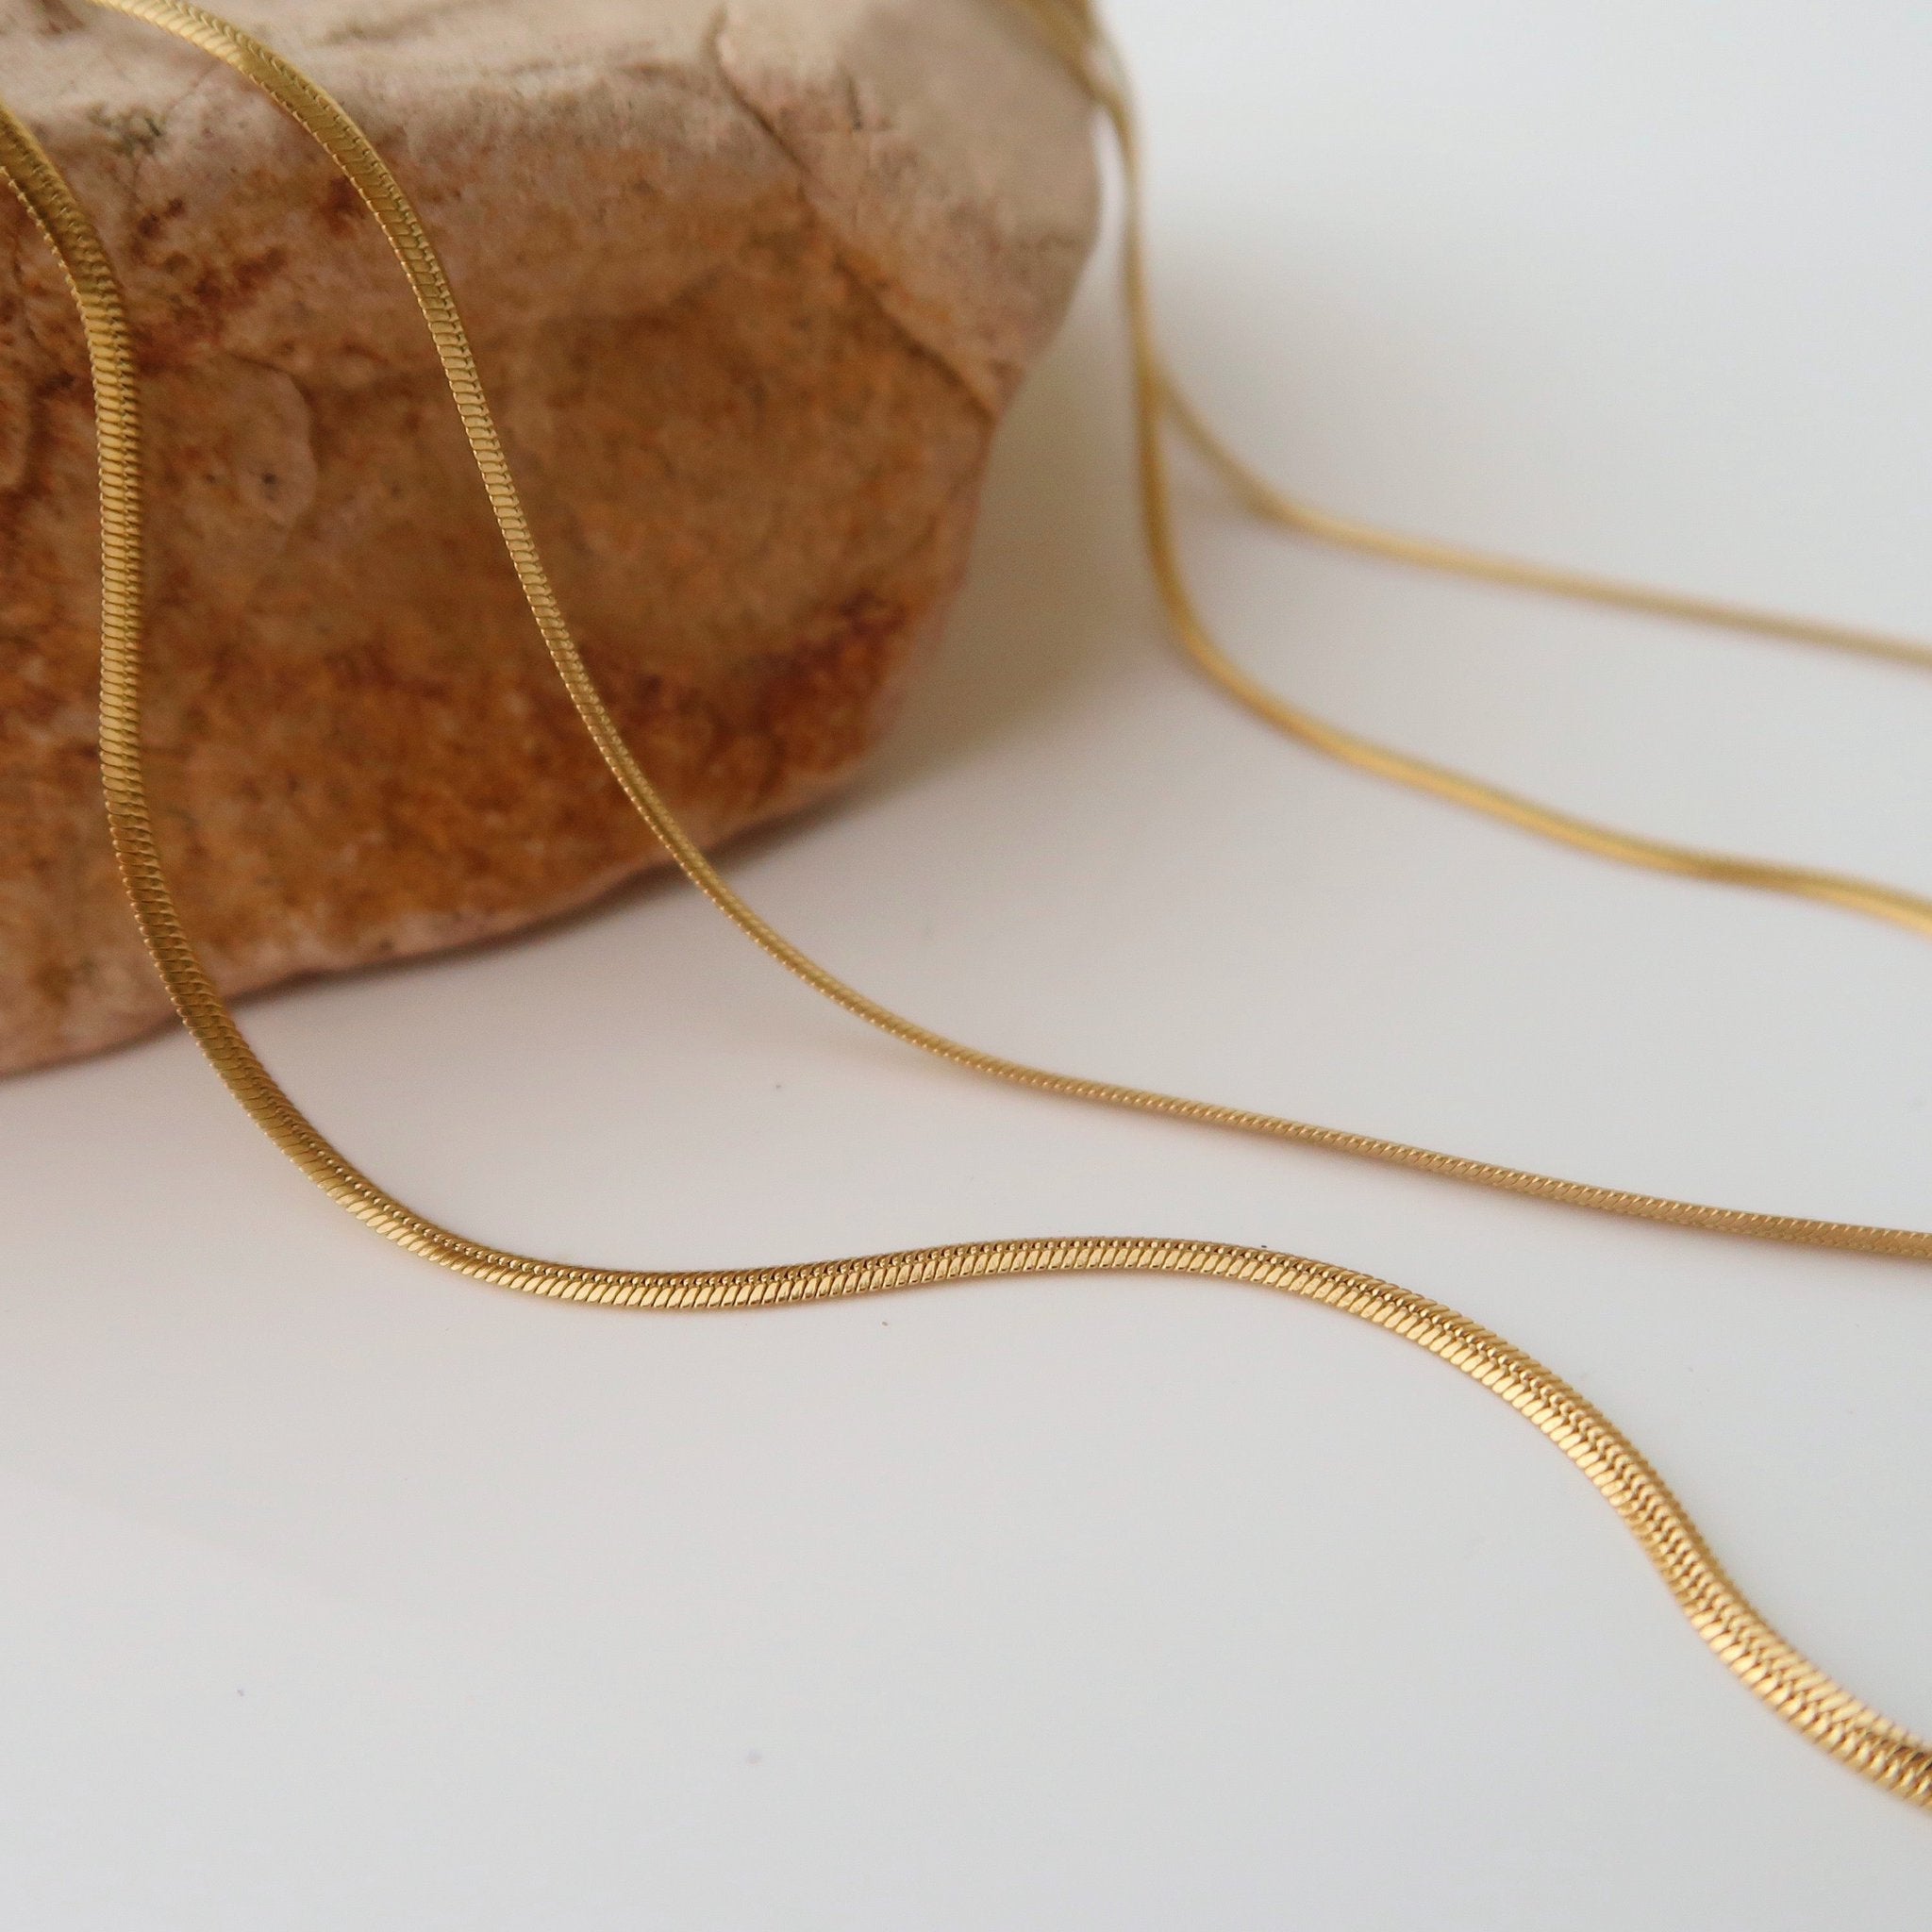 Slim version: Gold plated classic serpentine bone chain necklace - flat - 1.2mm wide